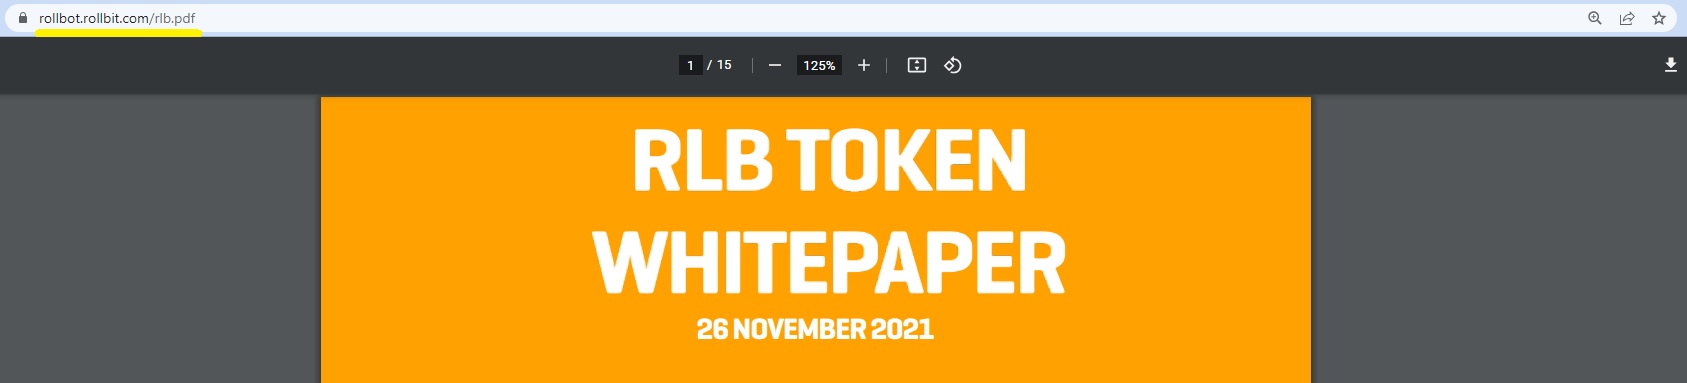 Exploring the Rollbit Coin Project and the RLB Token Price-Whitepaper